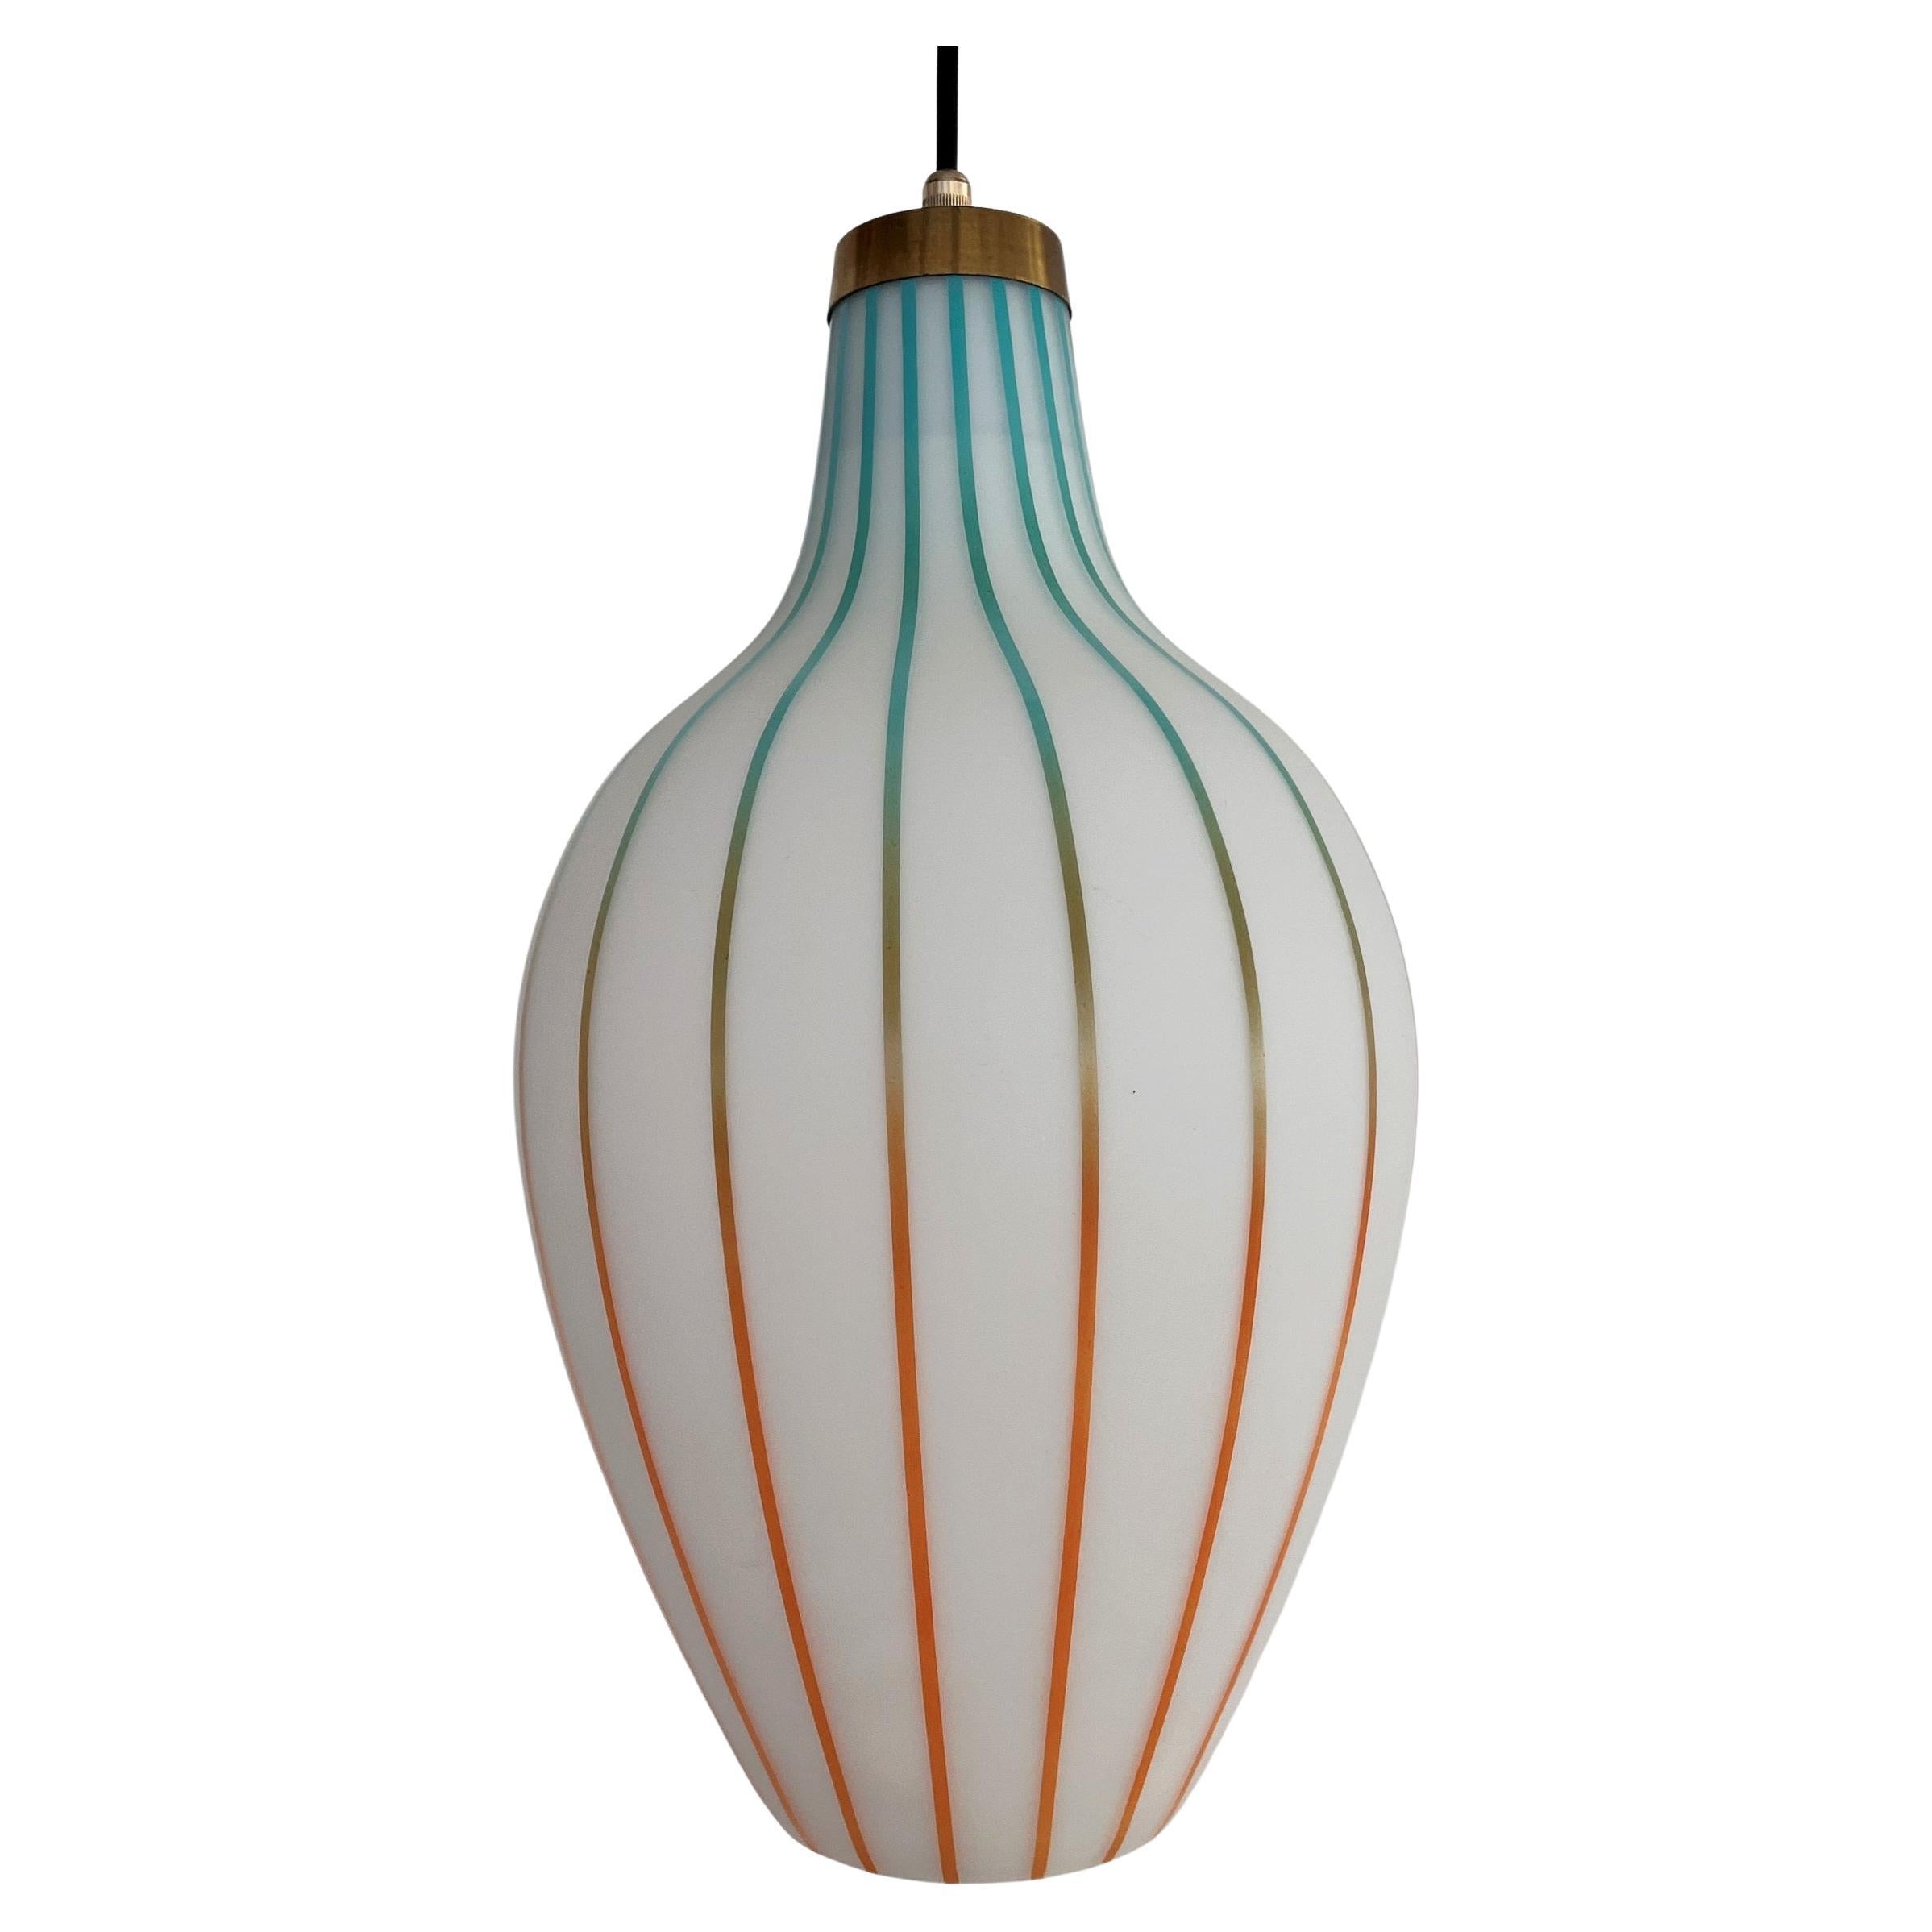 Italian MidCentury Pendant Light with Murano Glass in Massimo Vignelli Style 60s For Sale